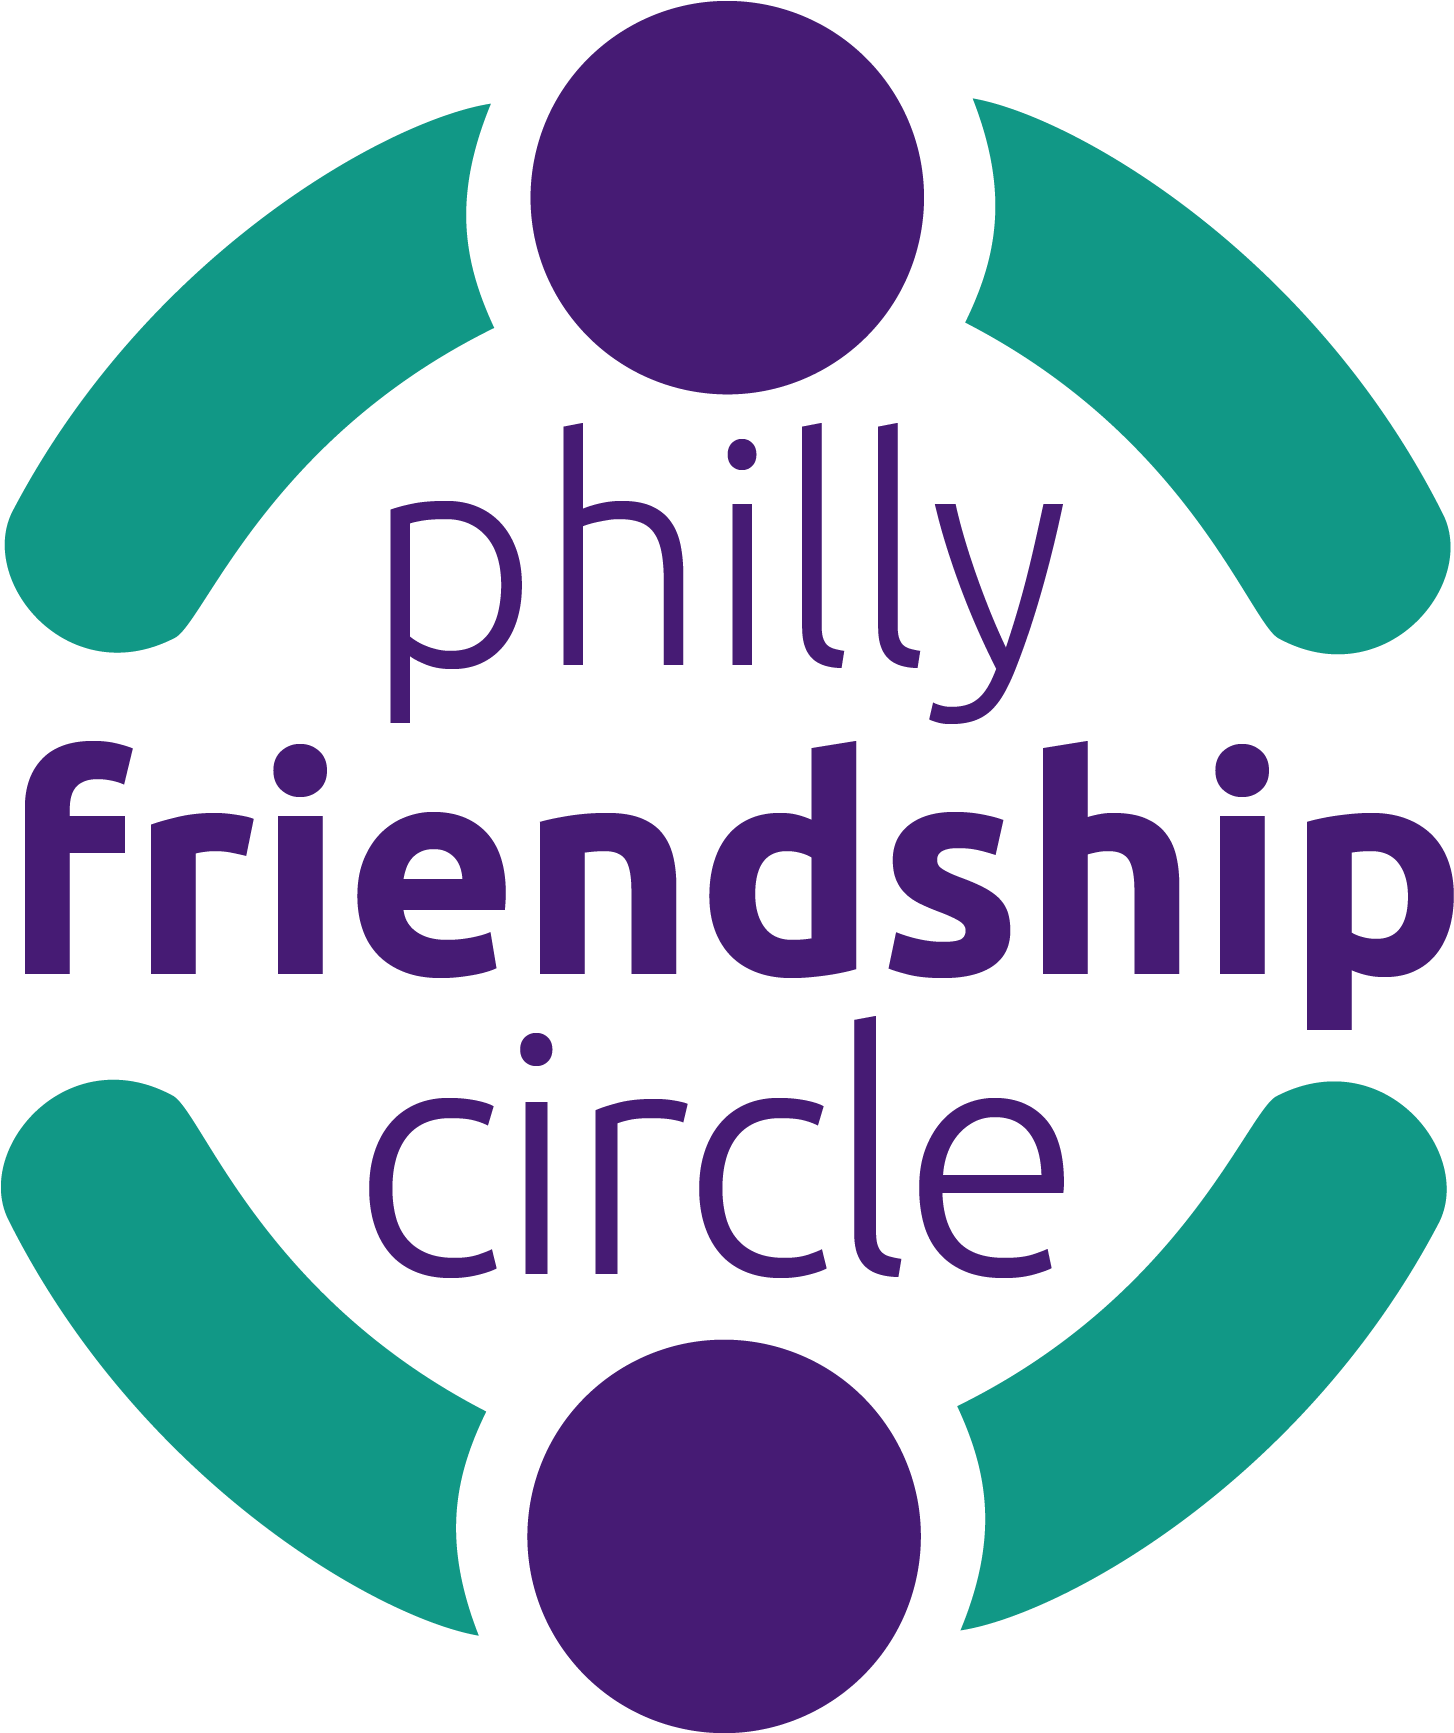 Philly Friendship Circle (1538x1732)